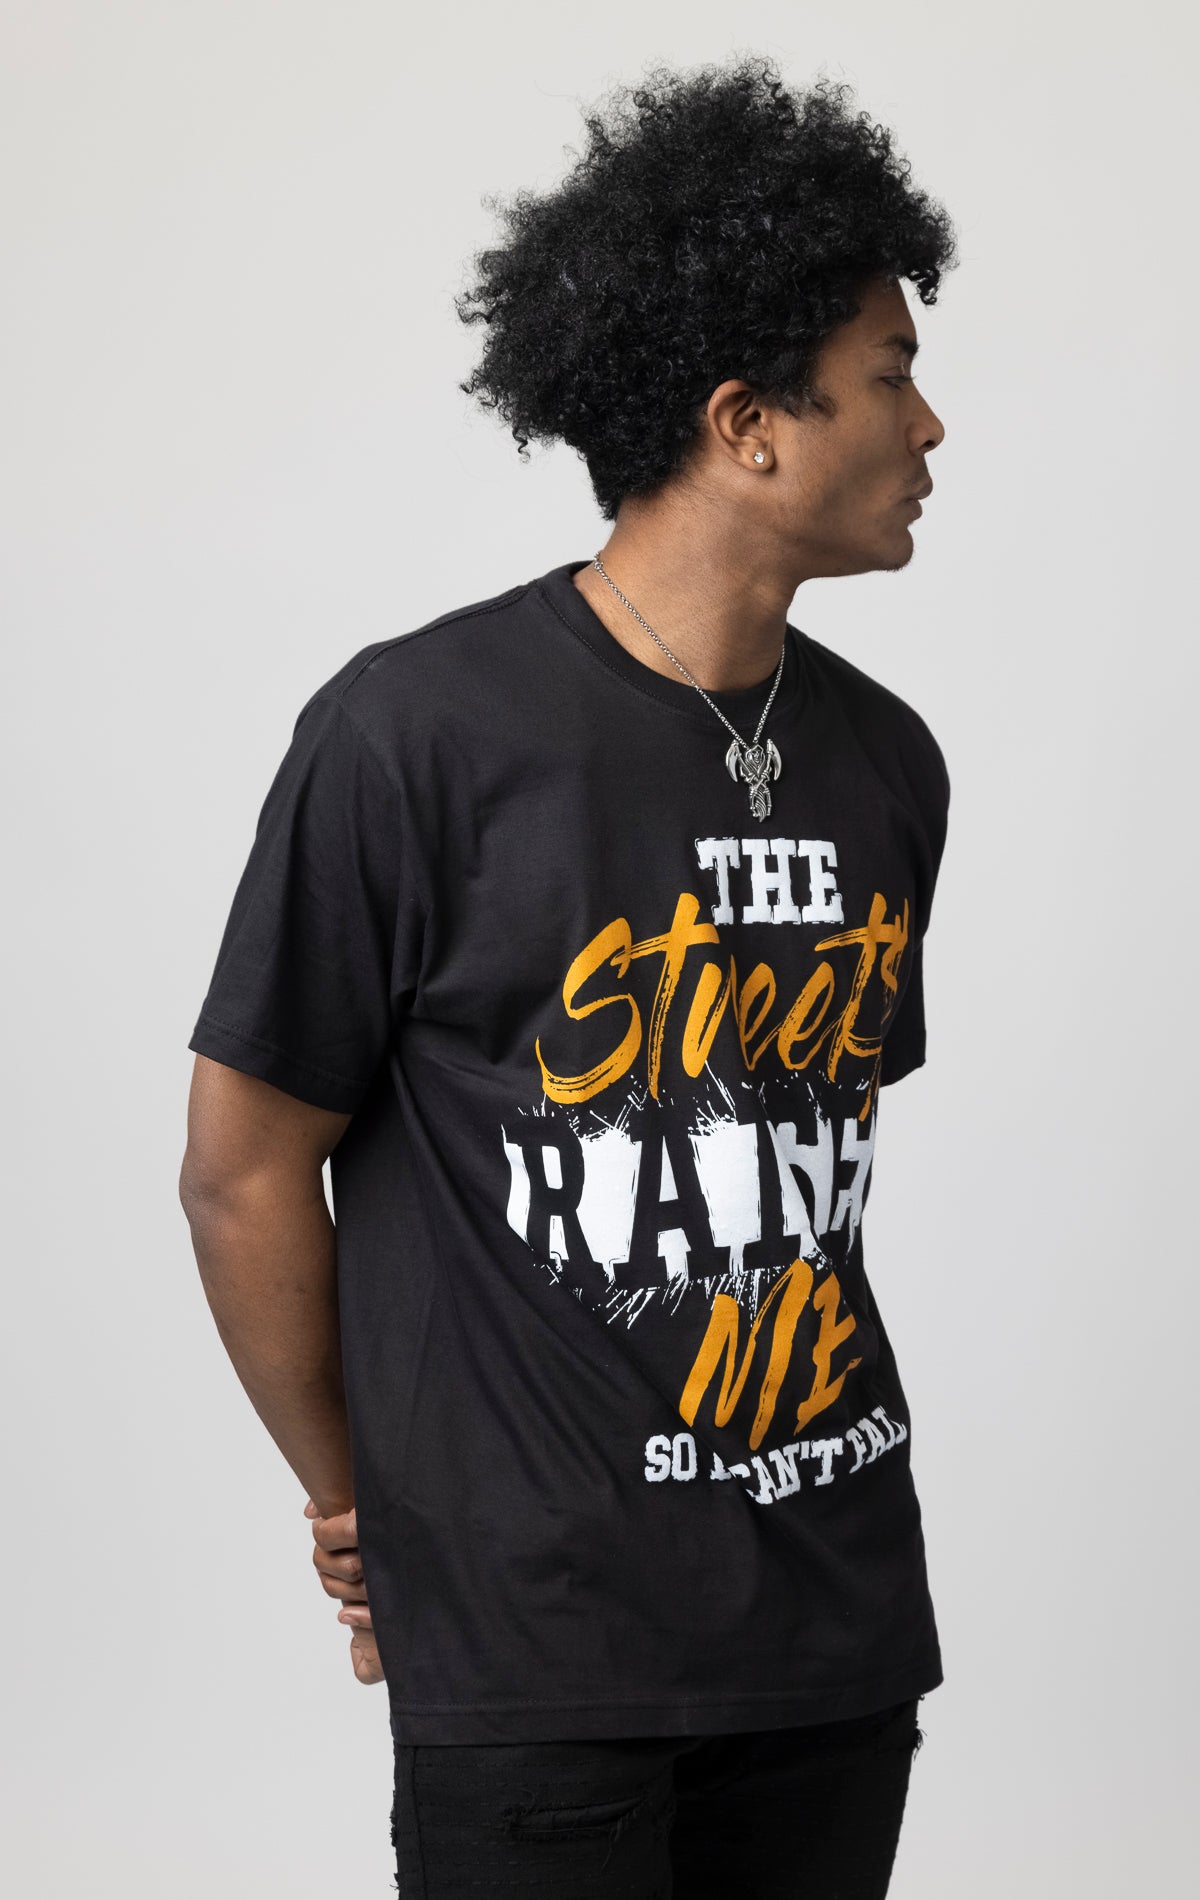 Oversized T-shirt with ribbed crew neck and a "The Streets Raised Me" printed design on the front.